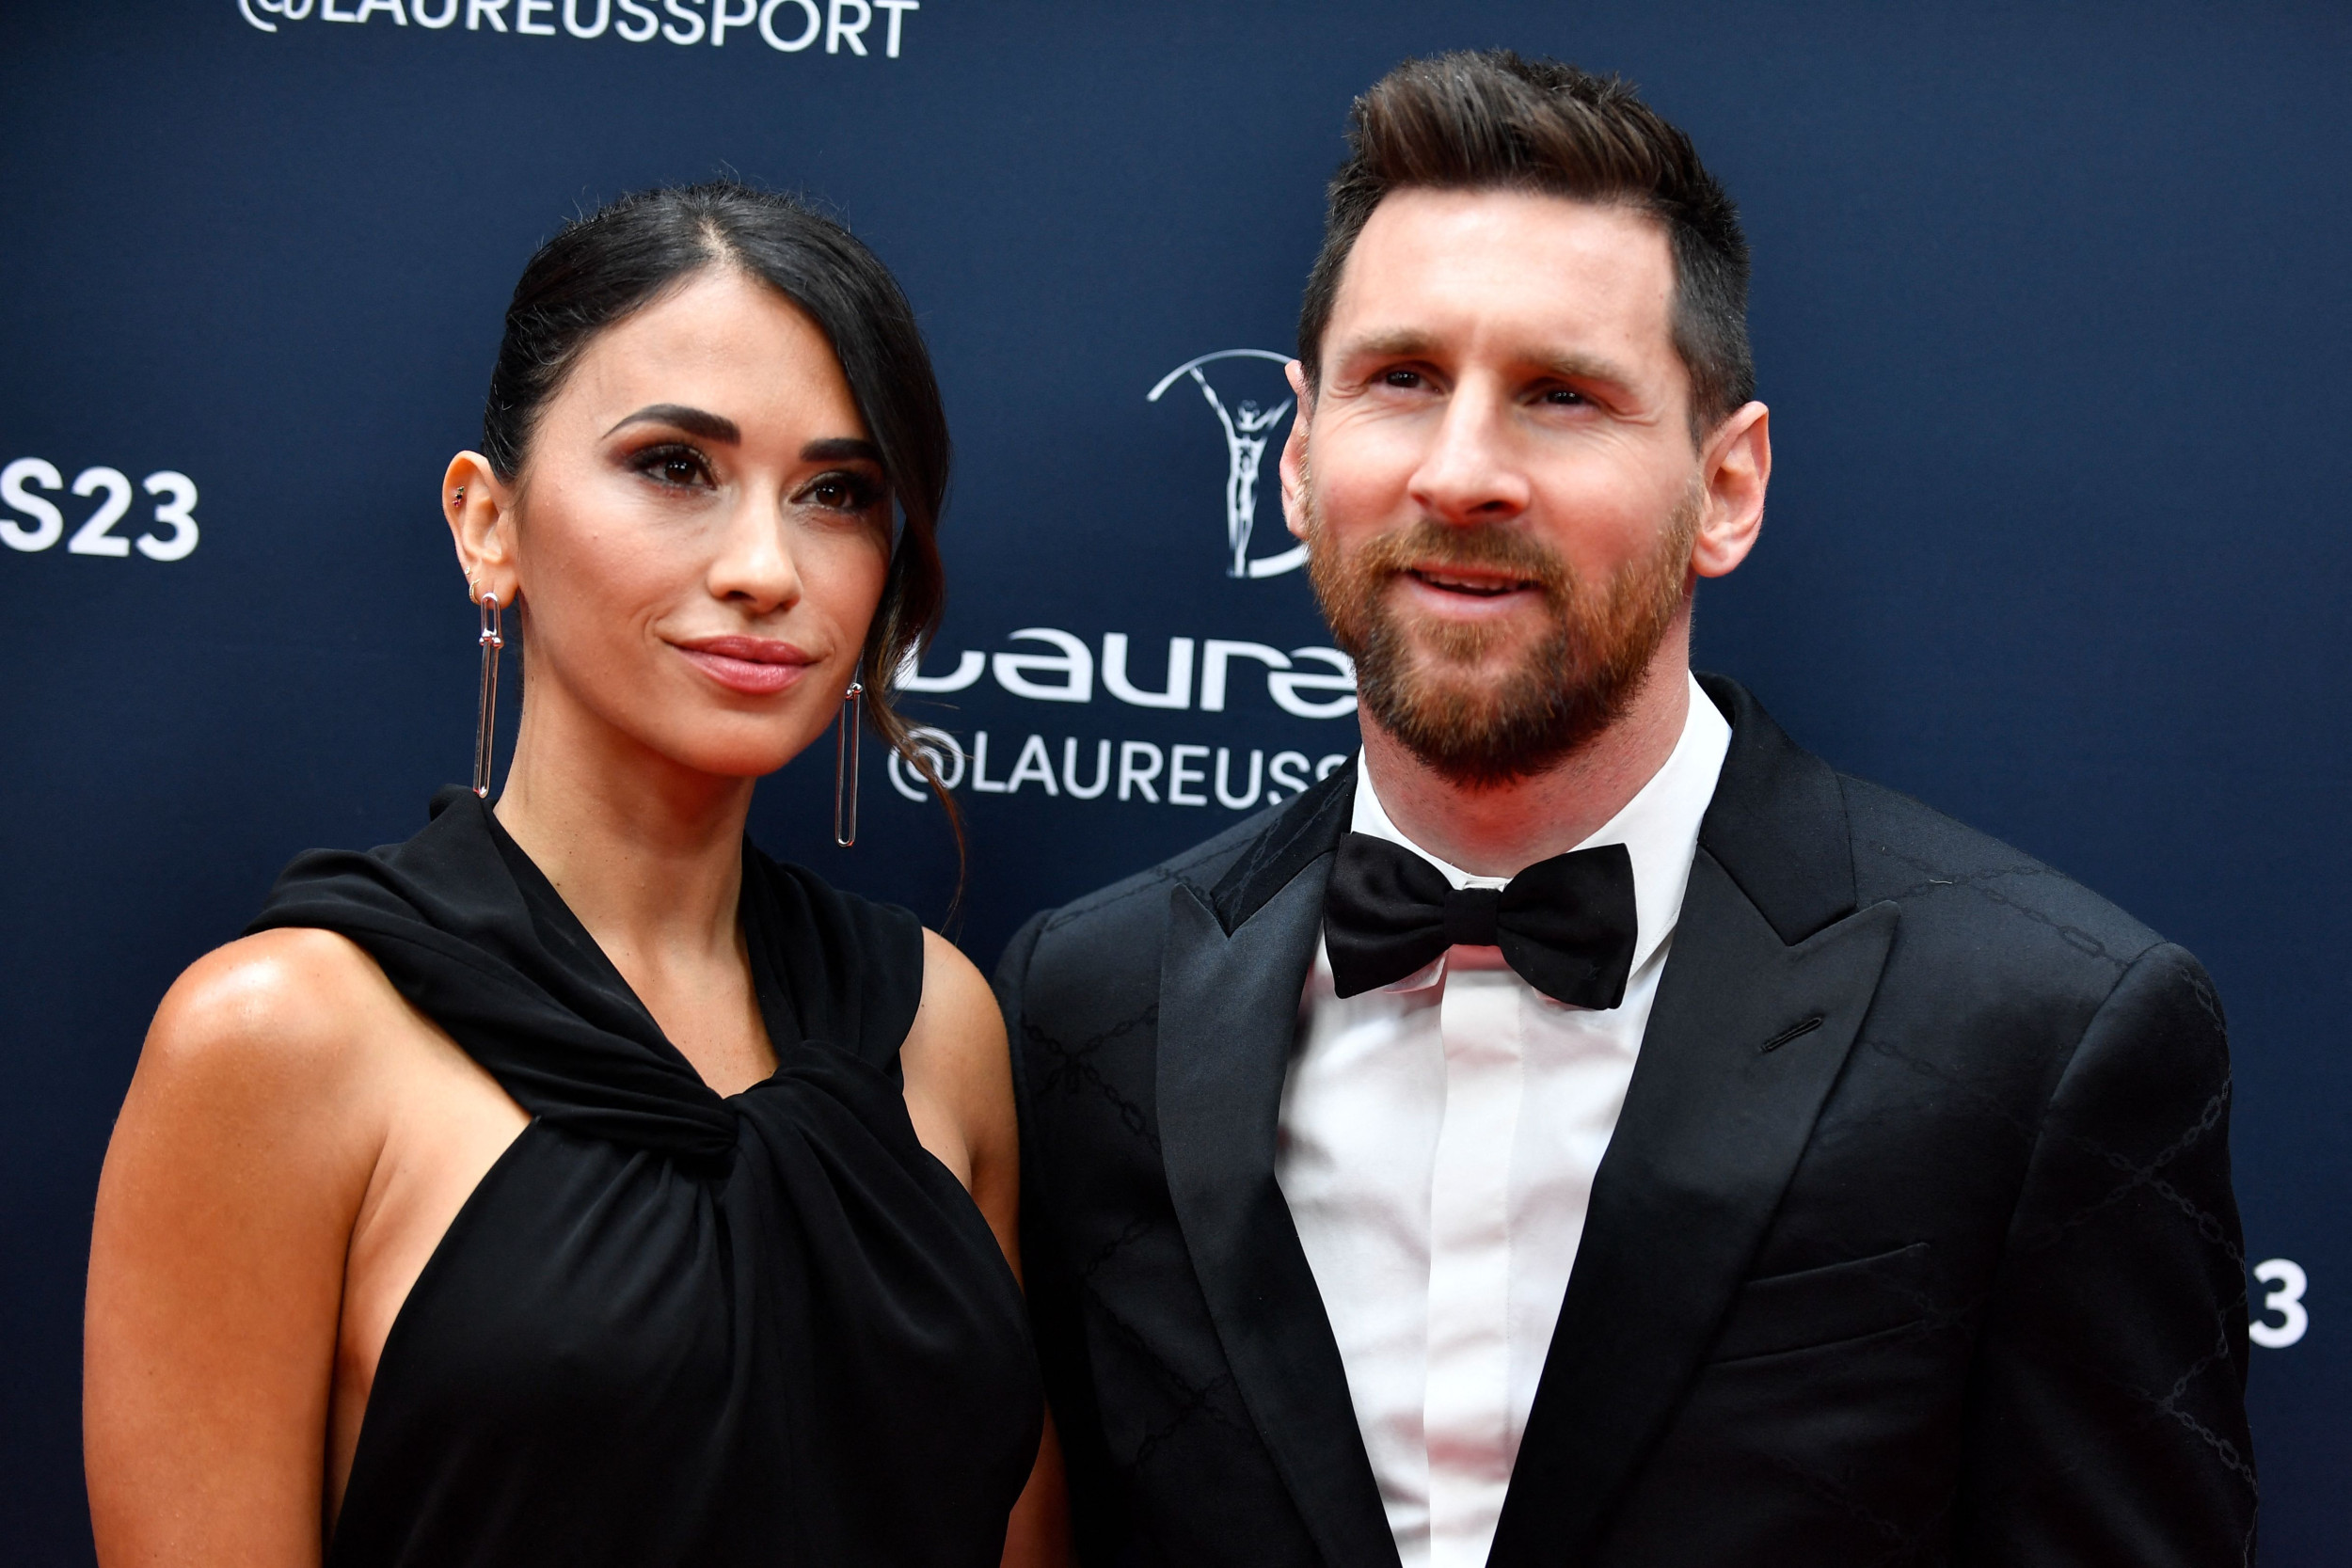 Inside Lionel Messi's Life With Wife Antonela Roccuzzo